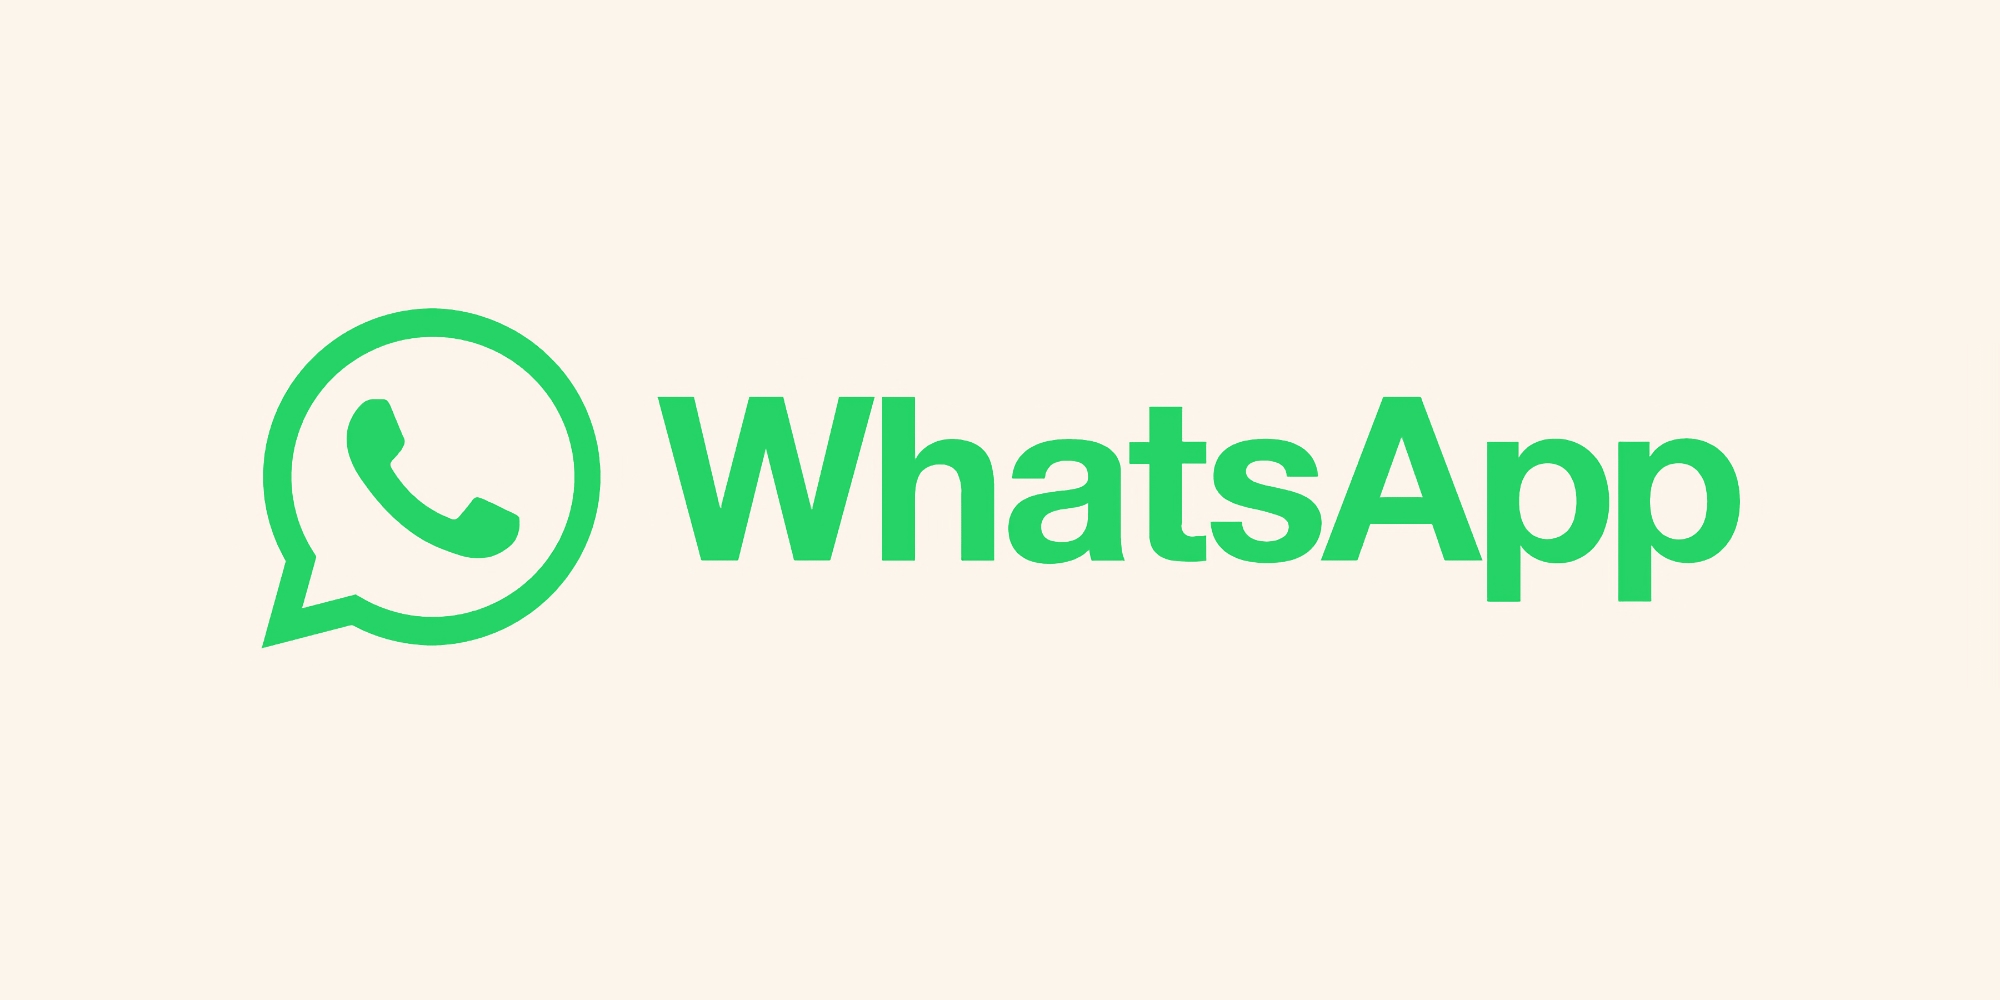 WhatsApp for iPhone now has the ability to send photos and videos in their original quality